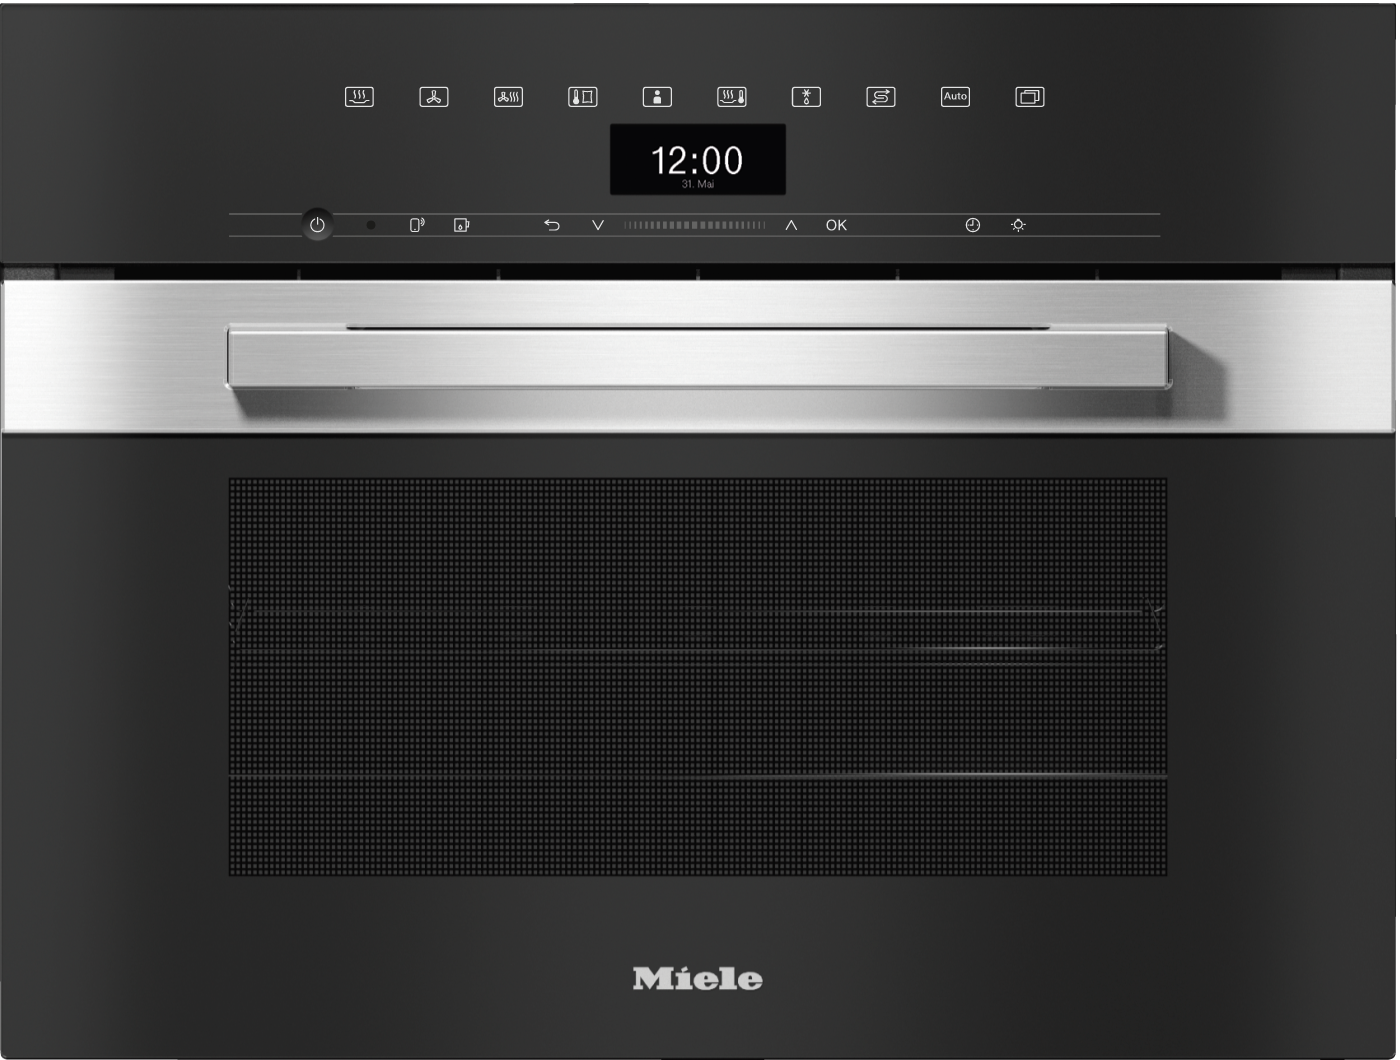 DGC 7440 HC ProCompact combination steam oven for steam cooking, baking, roasting with networking + HydroClean.